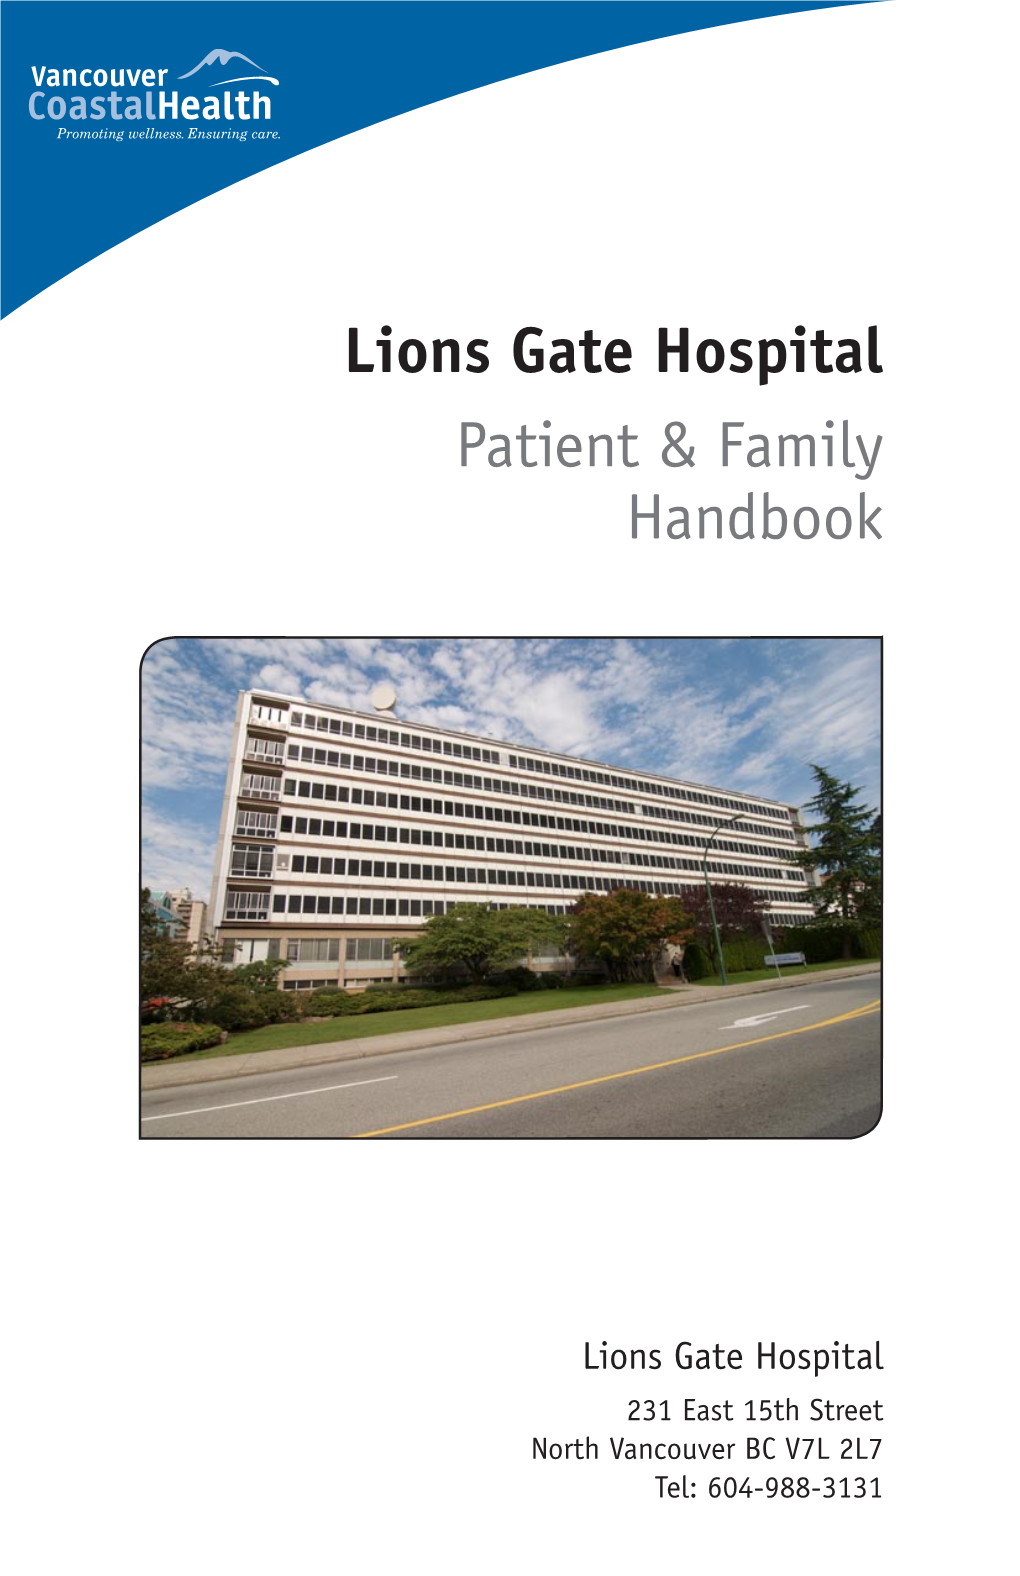 Patient and Family Handbook (LGH)